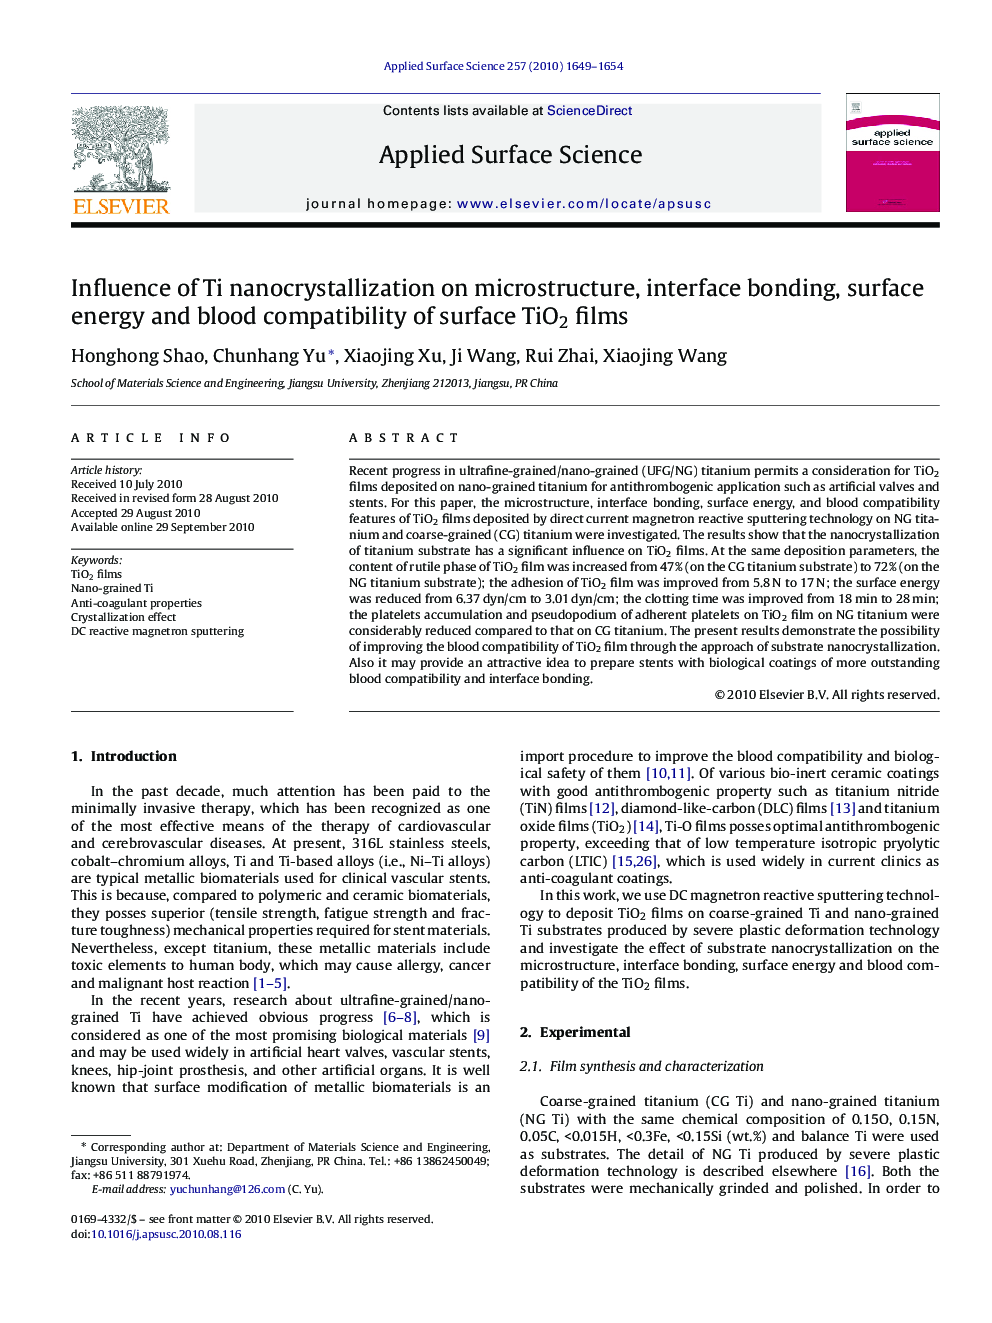 Influence of Ti nanocrystallization on microstructure, interface bonding, surface energy and blood compatibility of surface TiO2 films